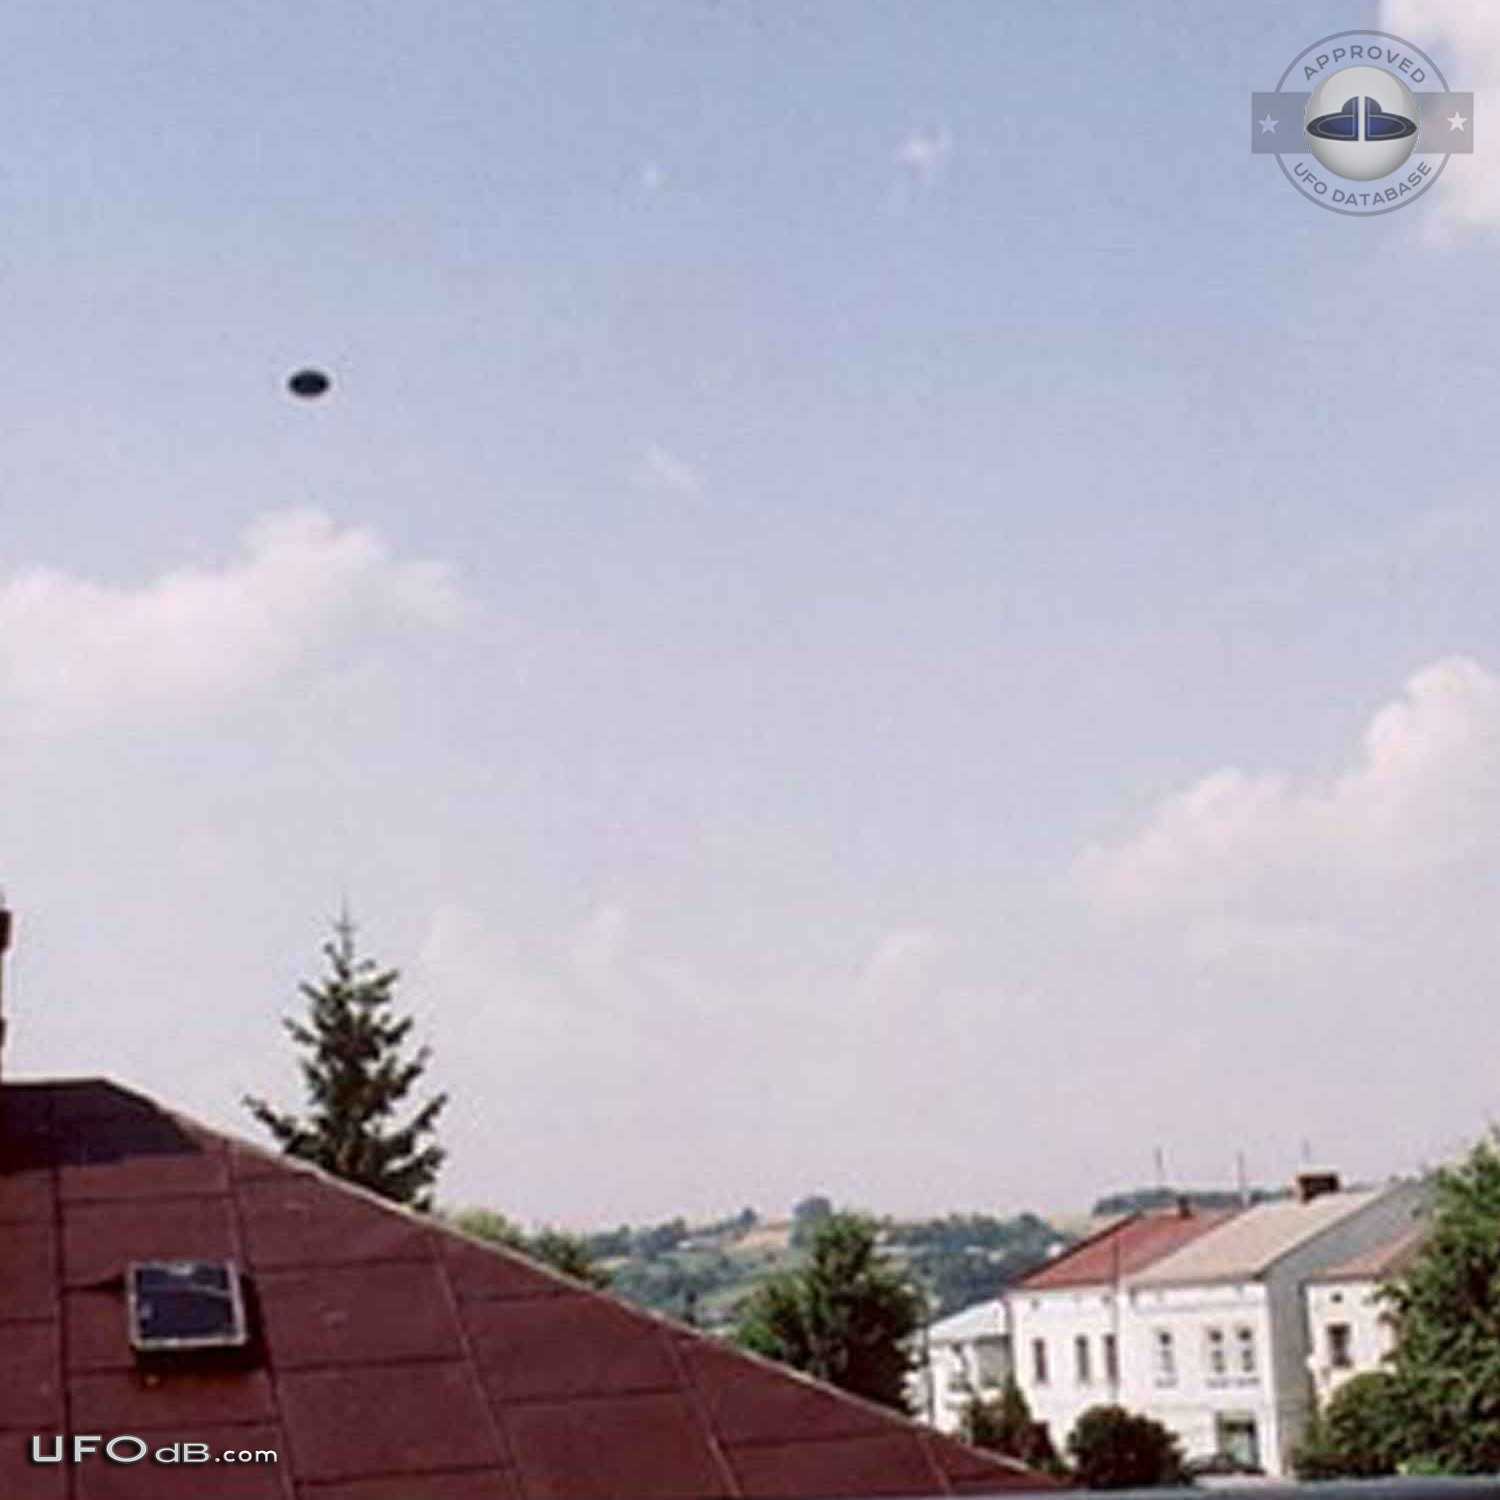 Poland 2003 Ufo sighting get aircrafts dispatched to check out the ufo UFO Picture #379-3